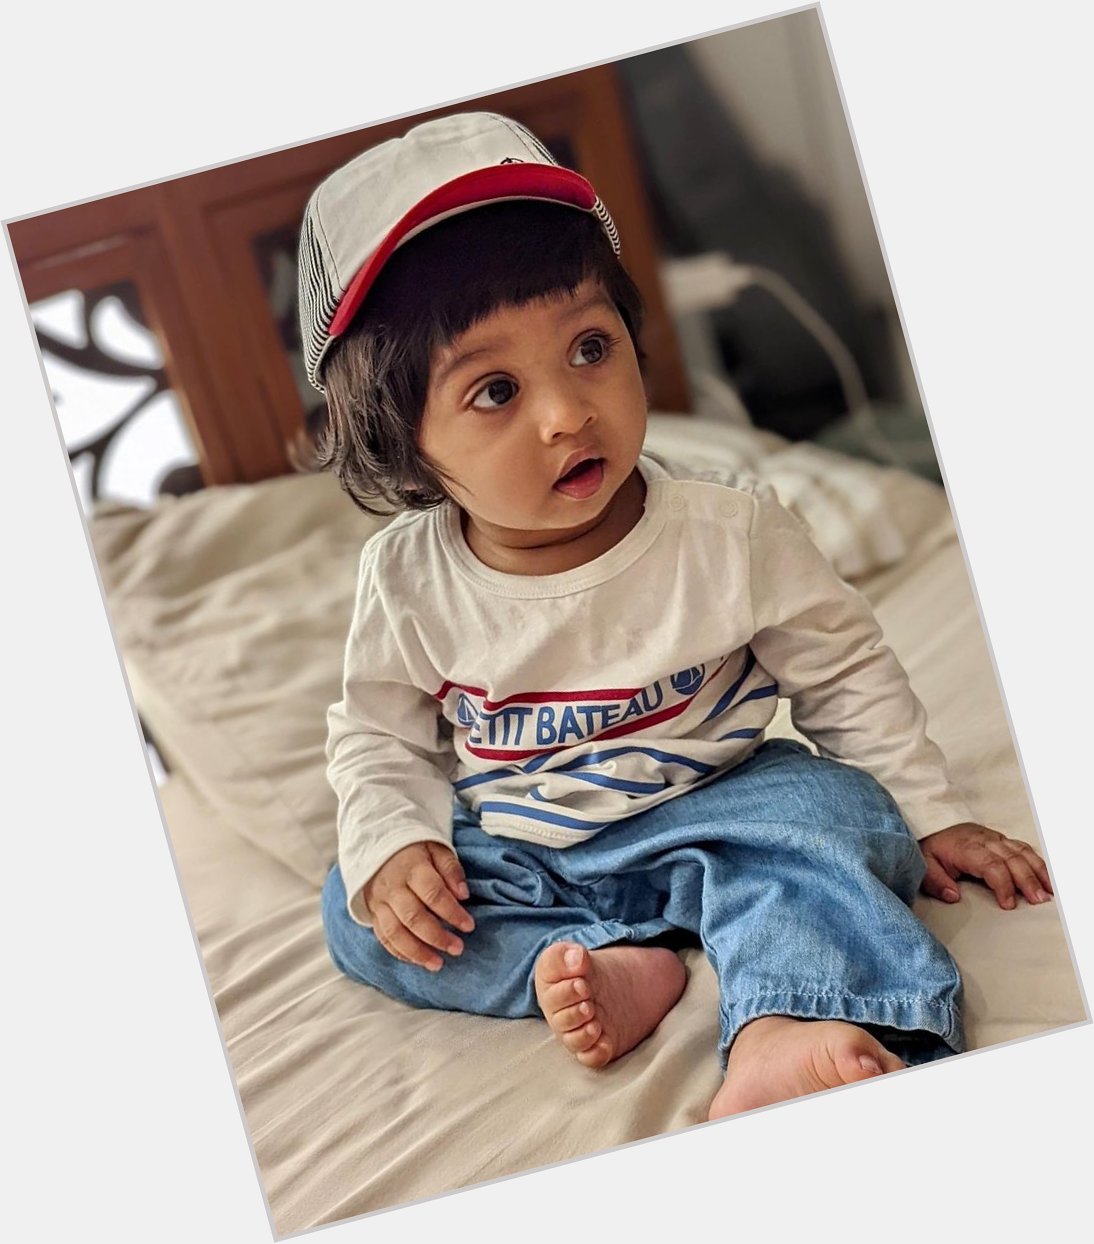 Our little prince

Happy Birthday Devyaan 